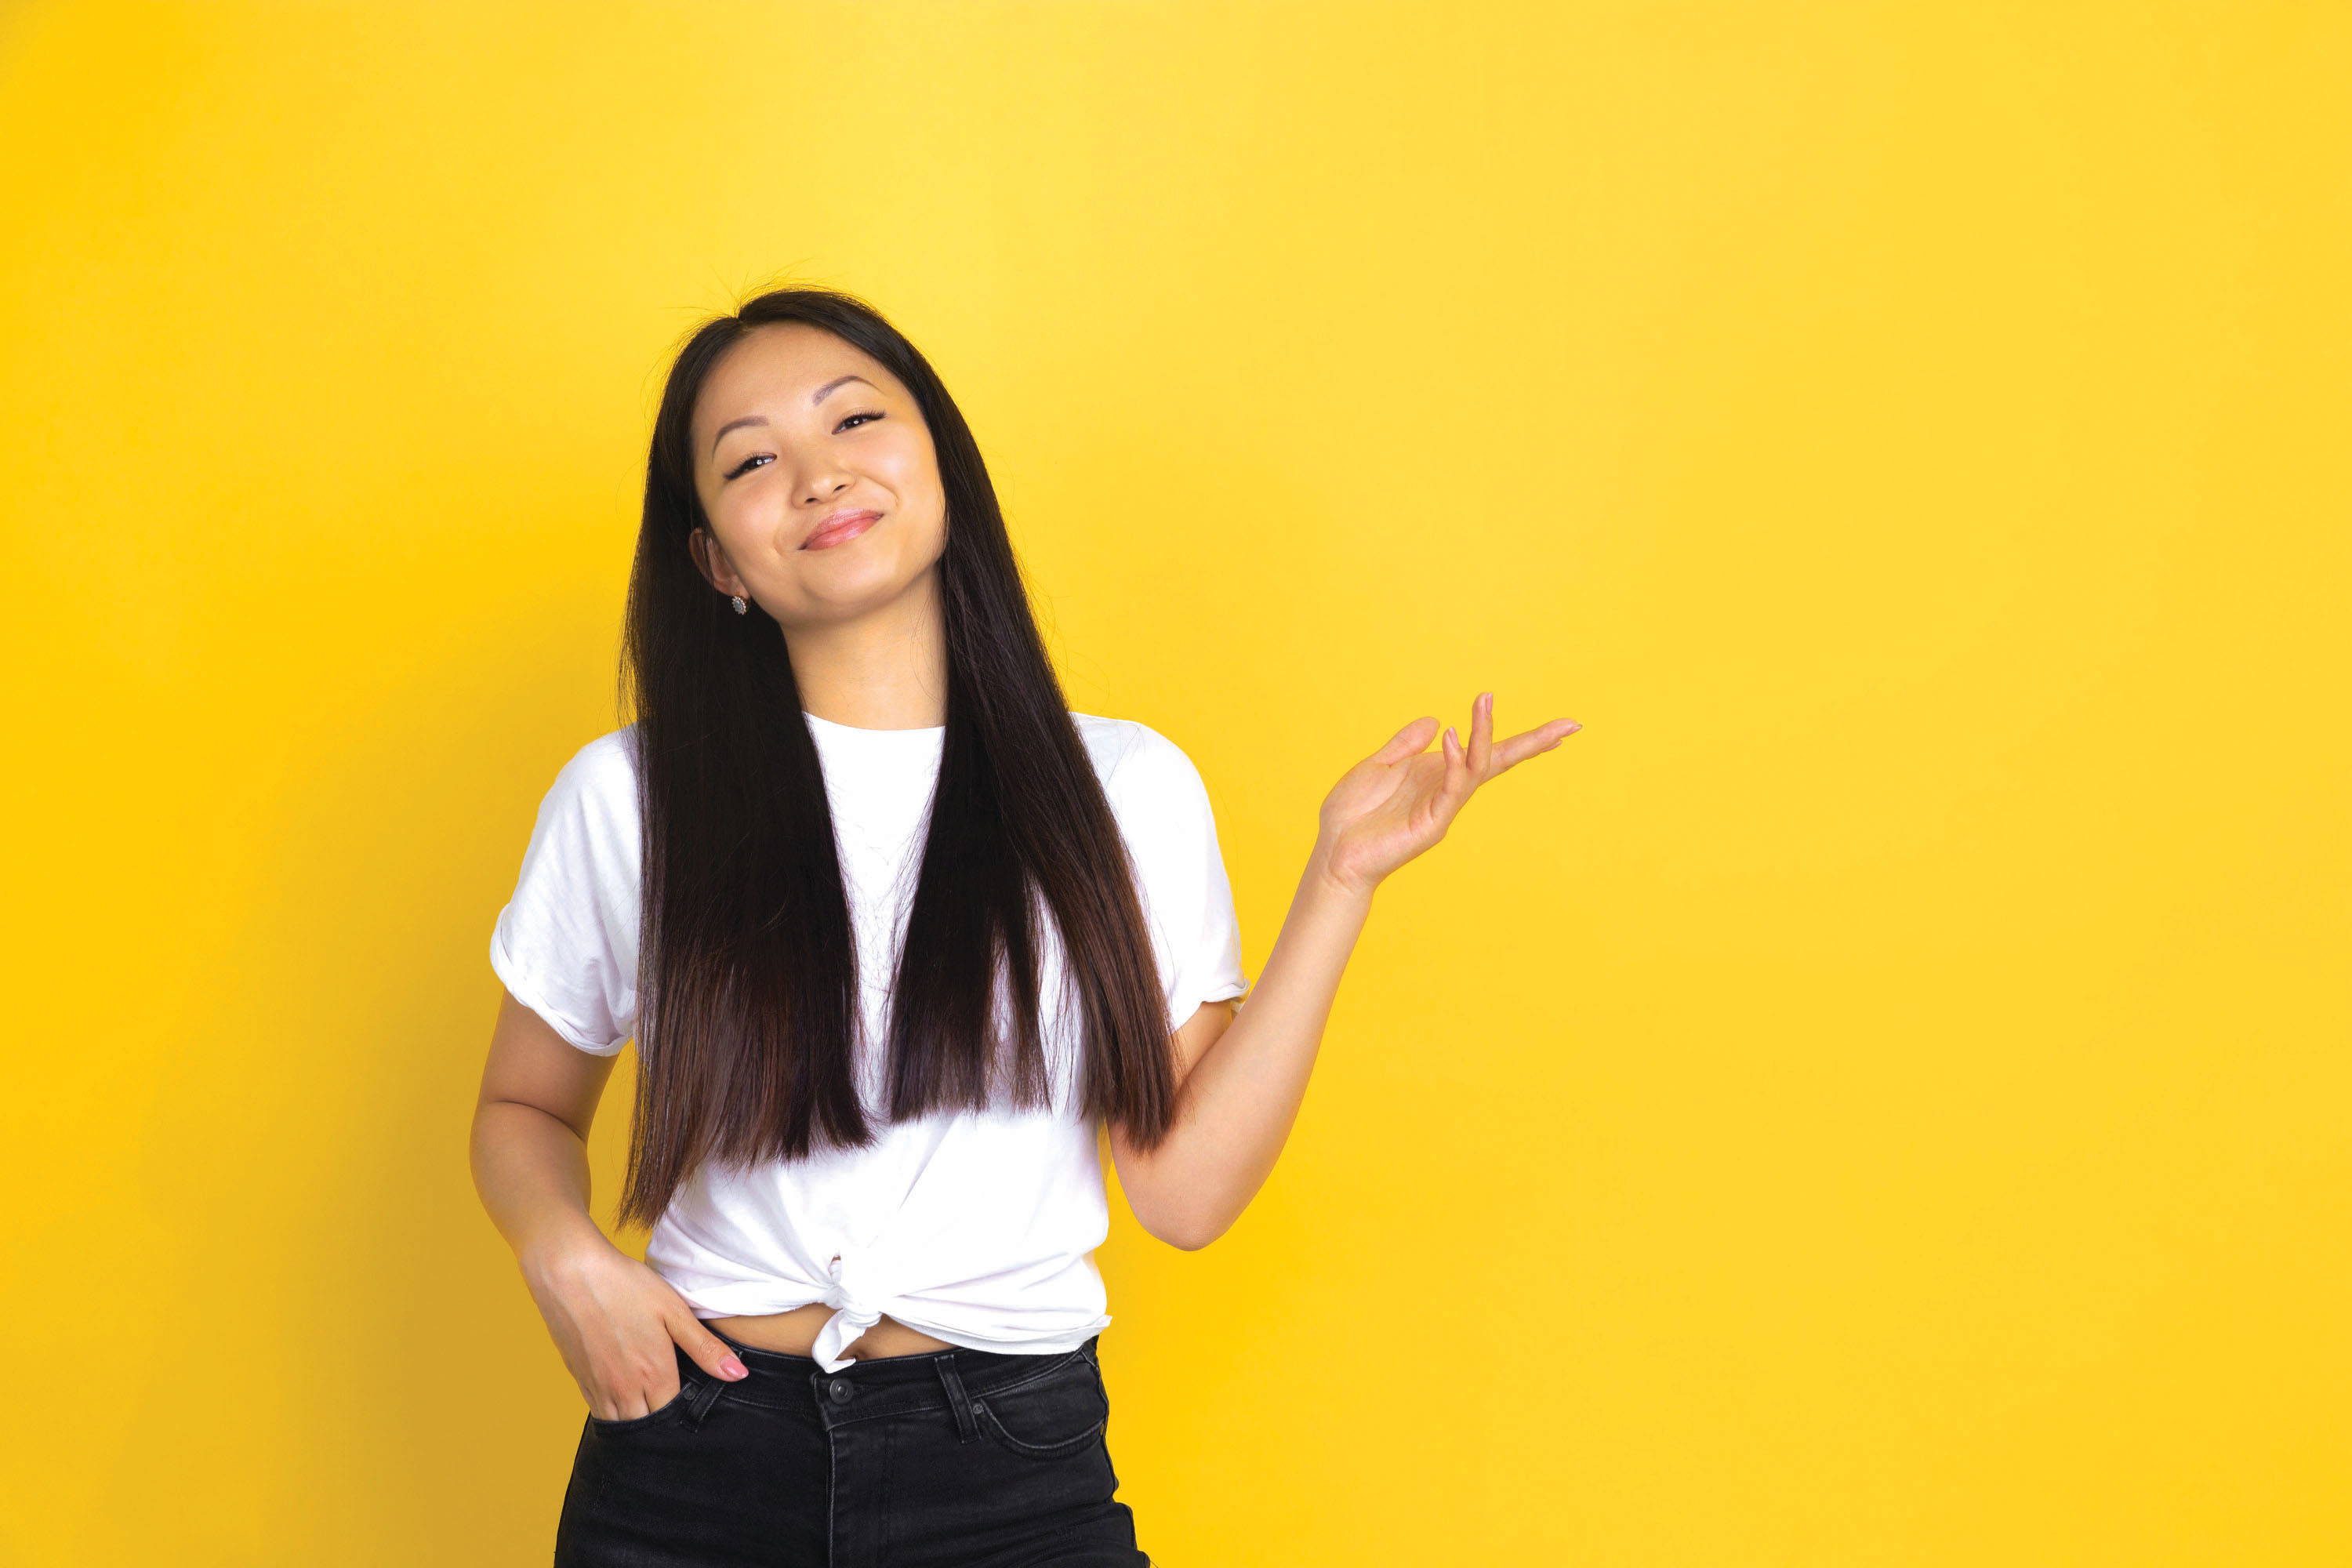 Asian female smiling with against a bright yellow background